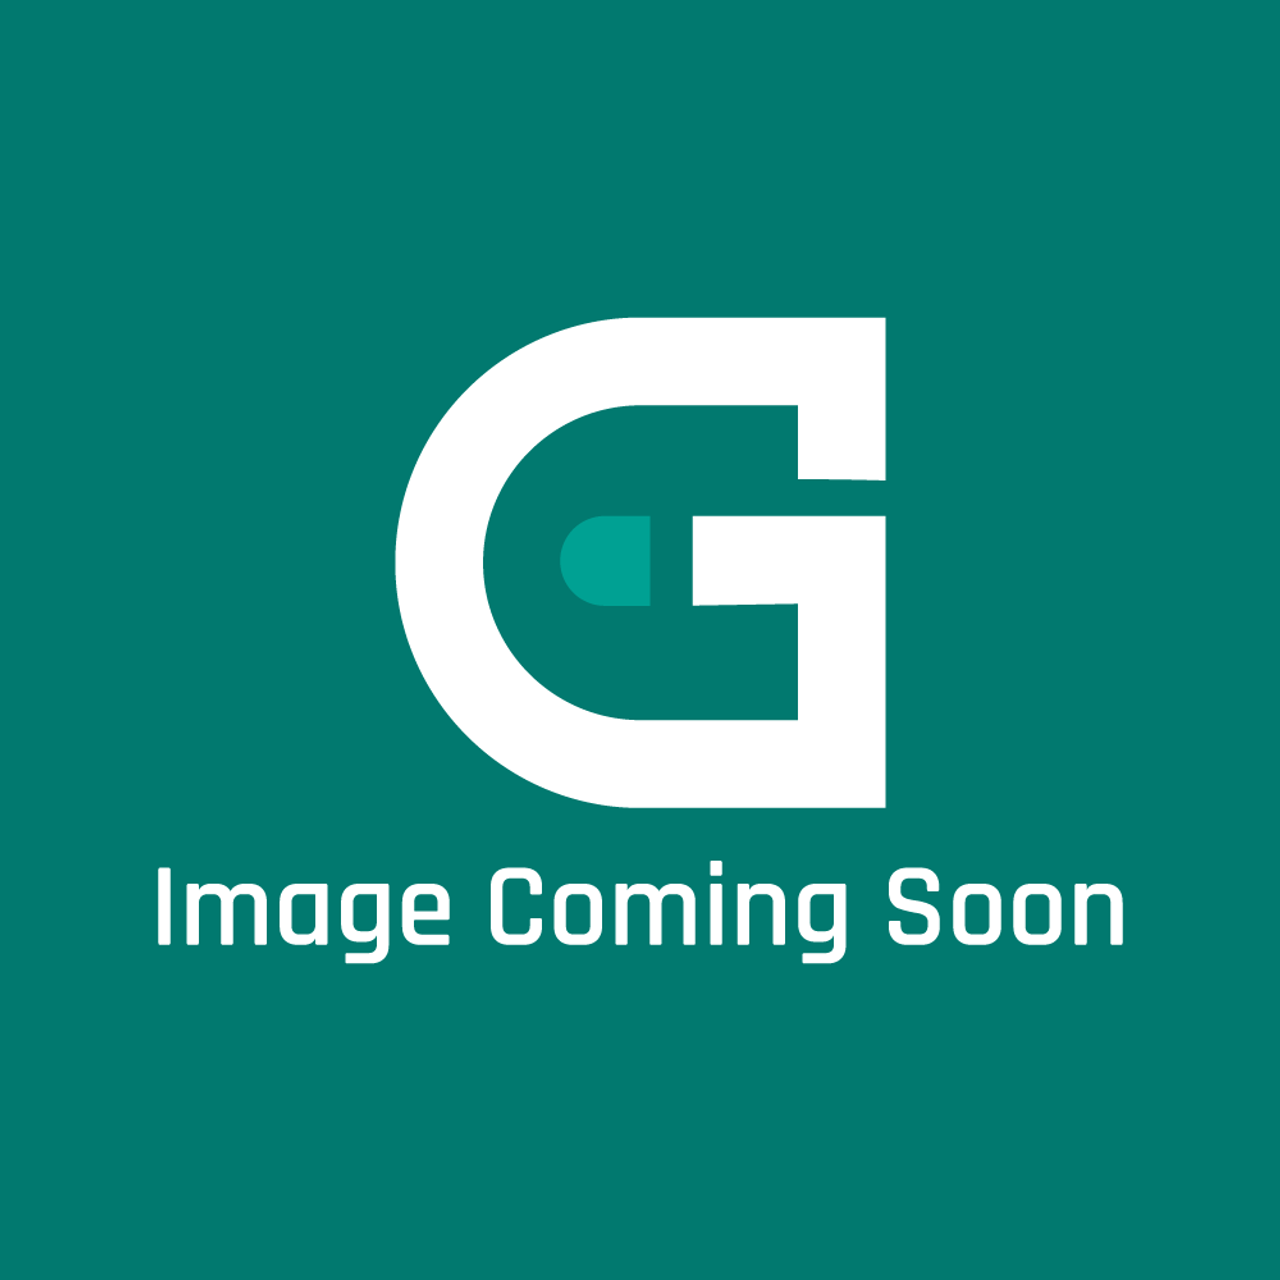 AGA Marvel RO4M27545 - 10Mm Compress Elbow Me110 - Image Coming Soon!